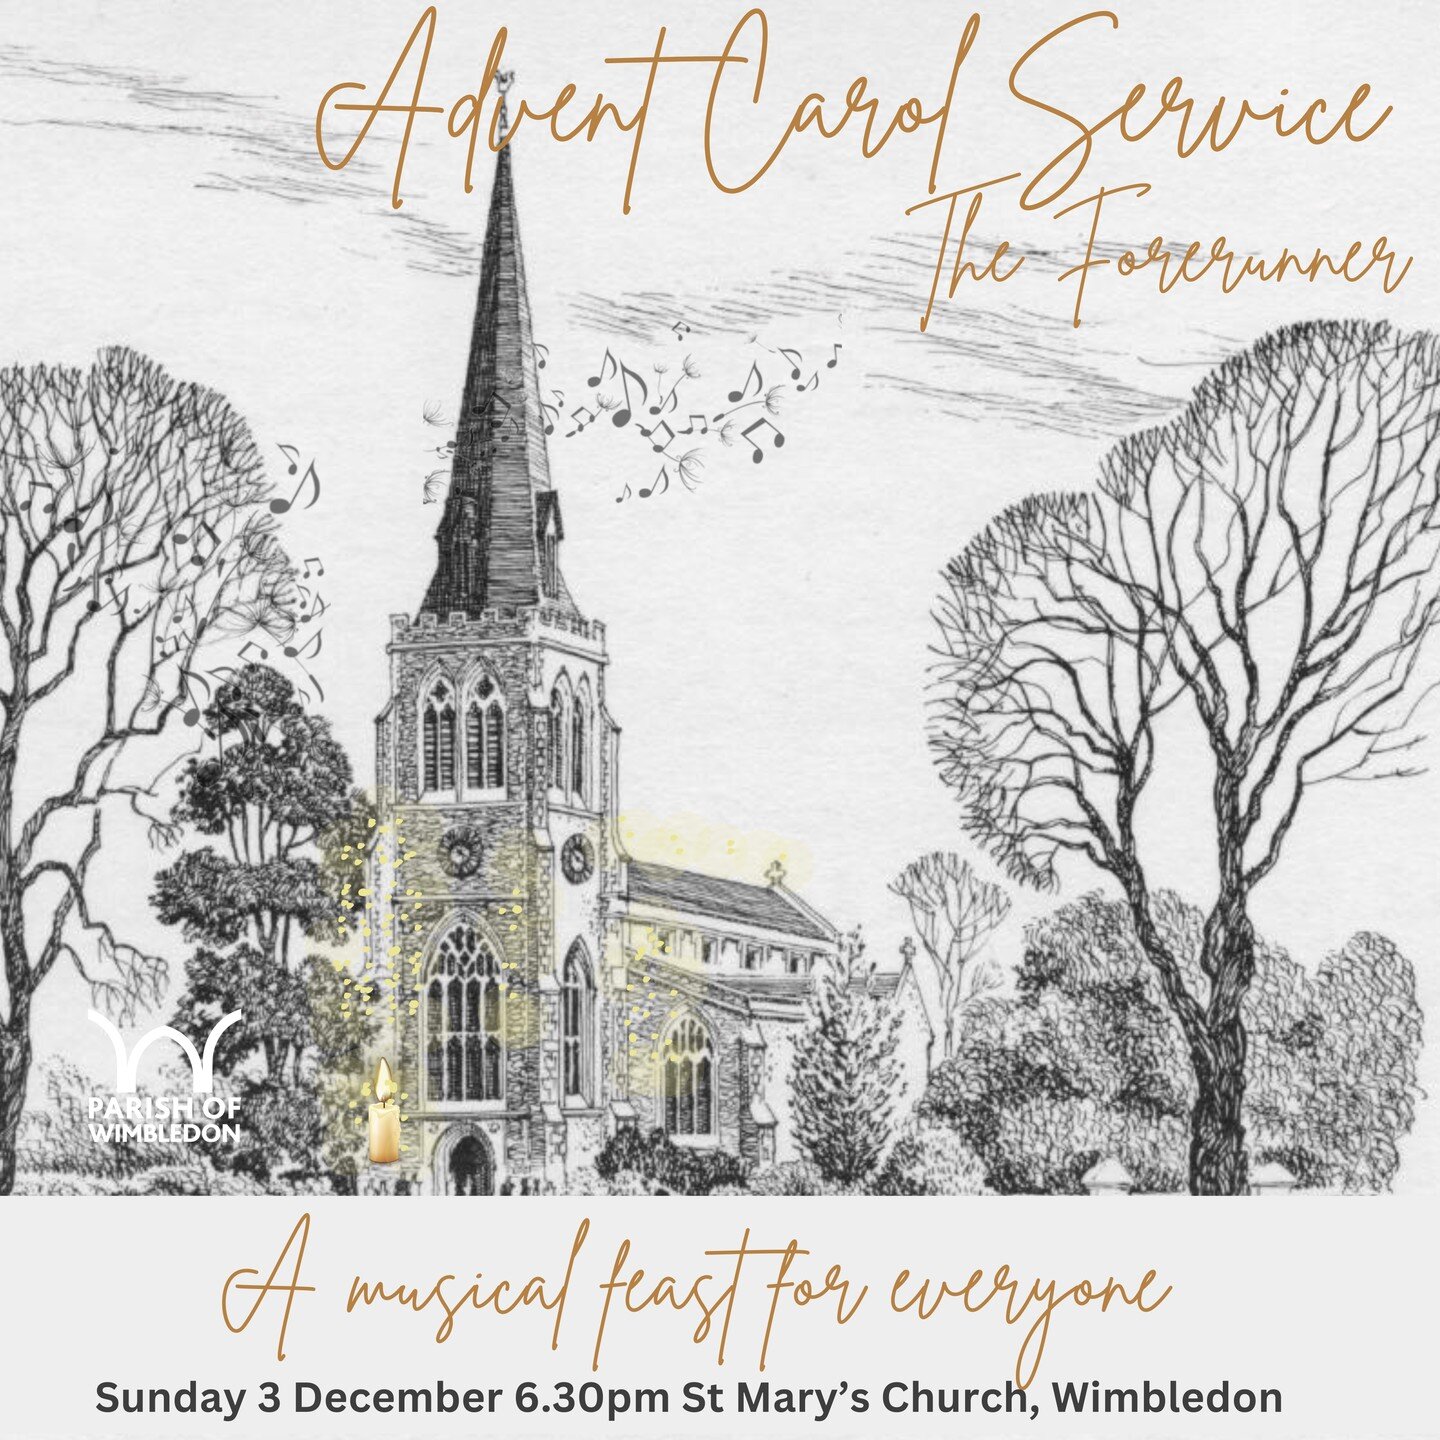 Come and join our Advent Carol Service this Sunday at 6.30pm. A real favourite of many of our congregation! #adventcarolservice #advent #wimbledonvillage #wimbledon #sundayservice #churchmusic